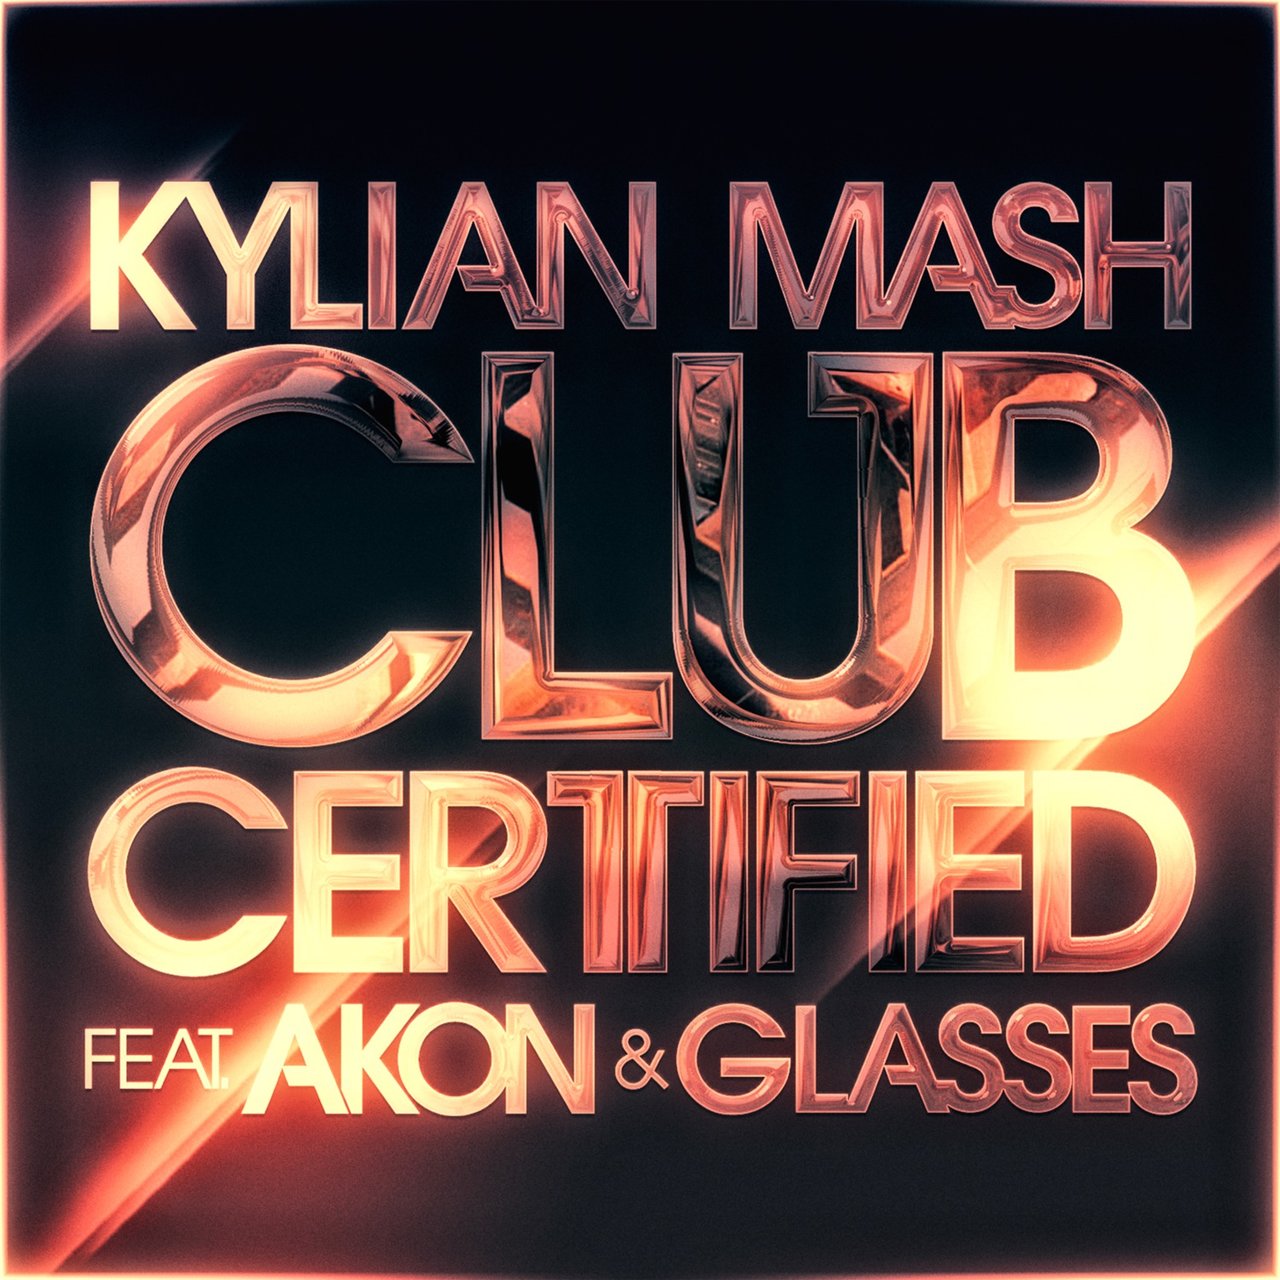 Kylian Mash featuring Akon & Glasses — Club Certified cover artwork